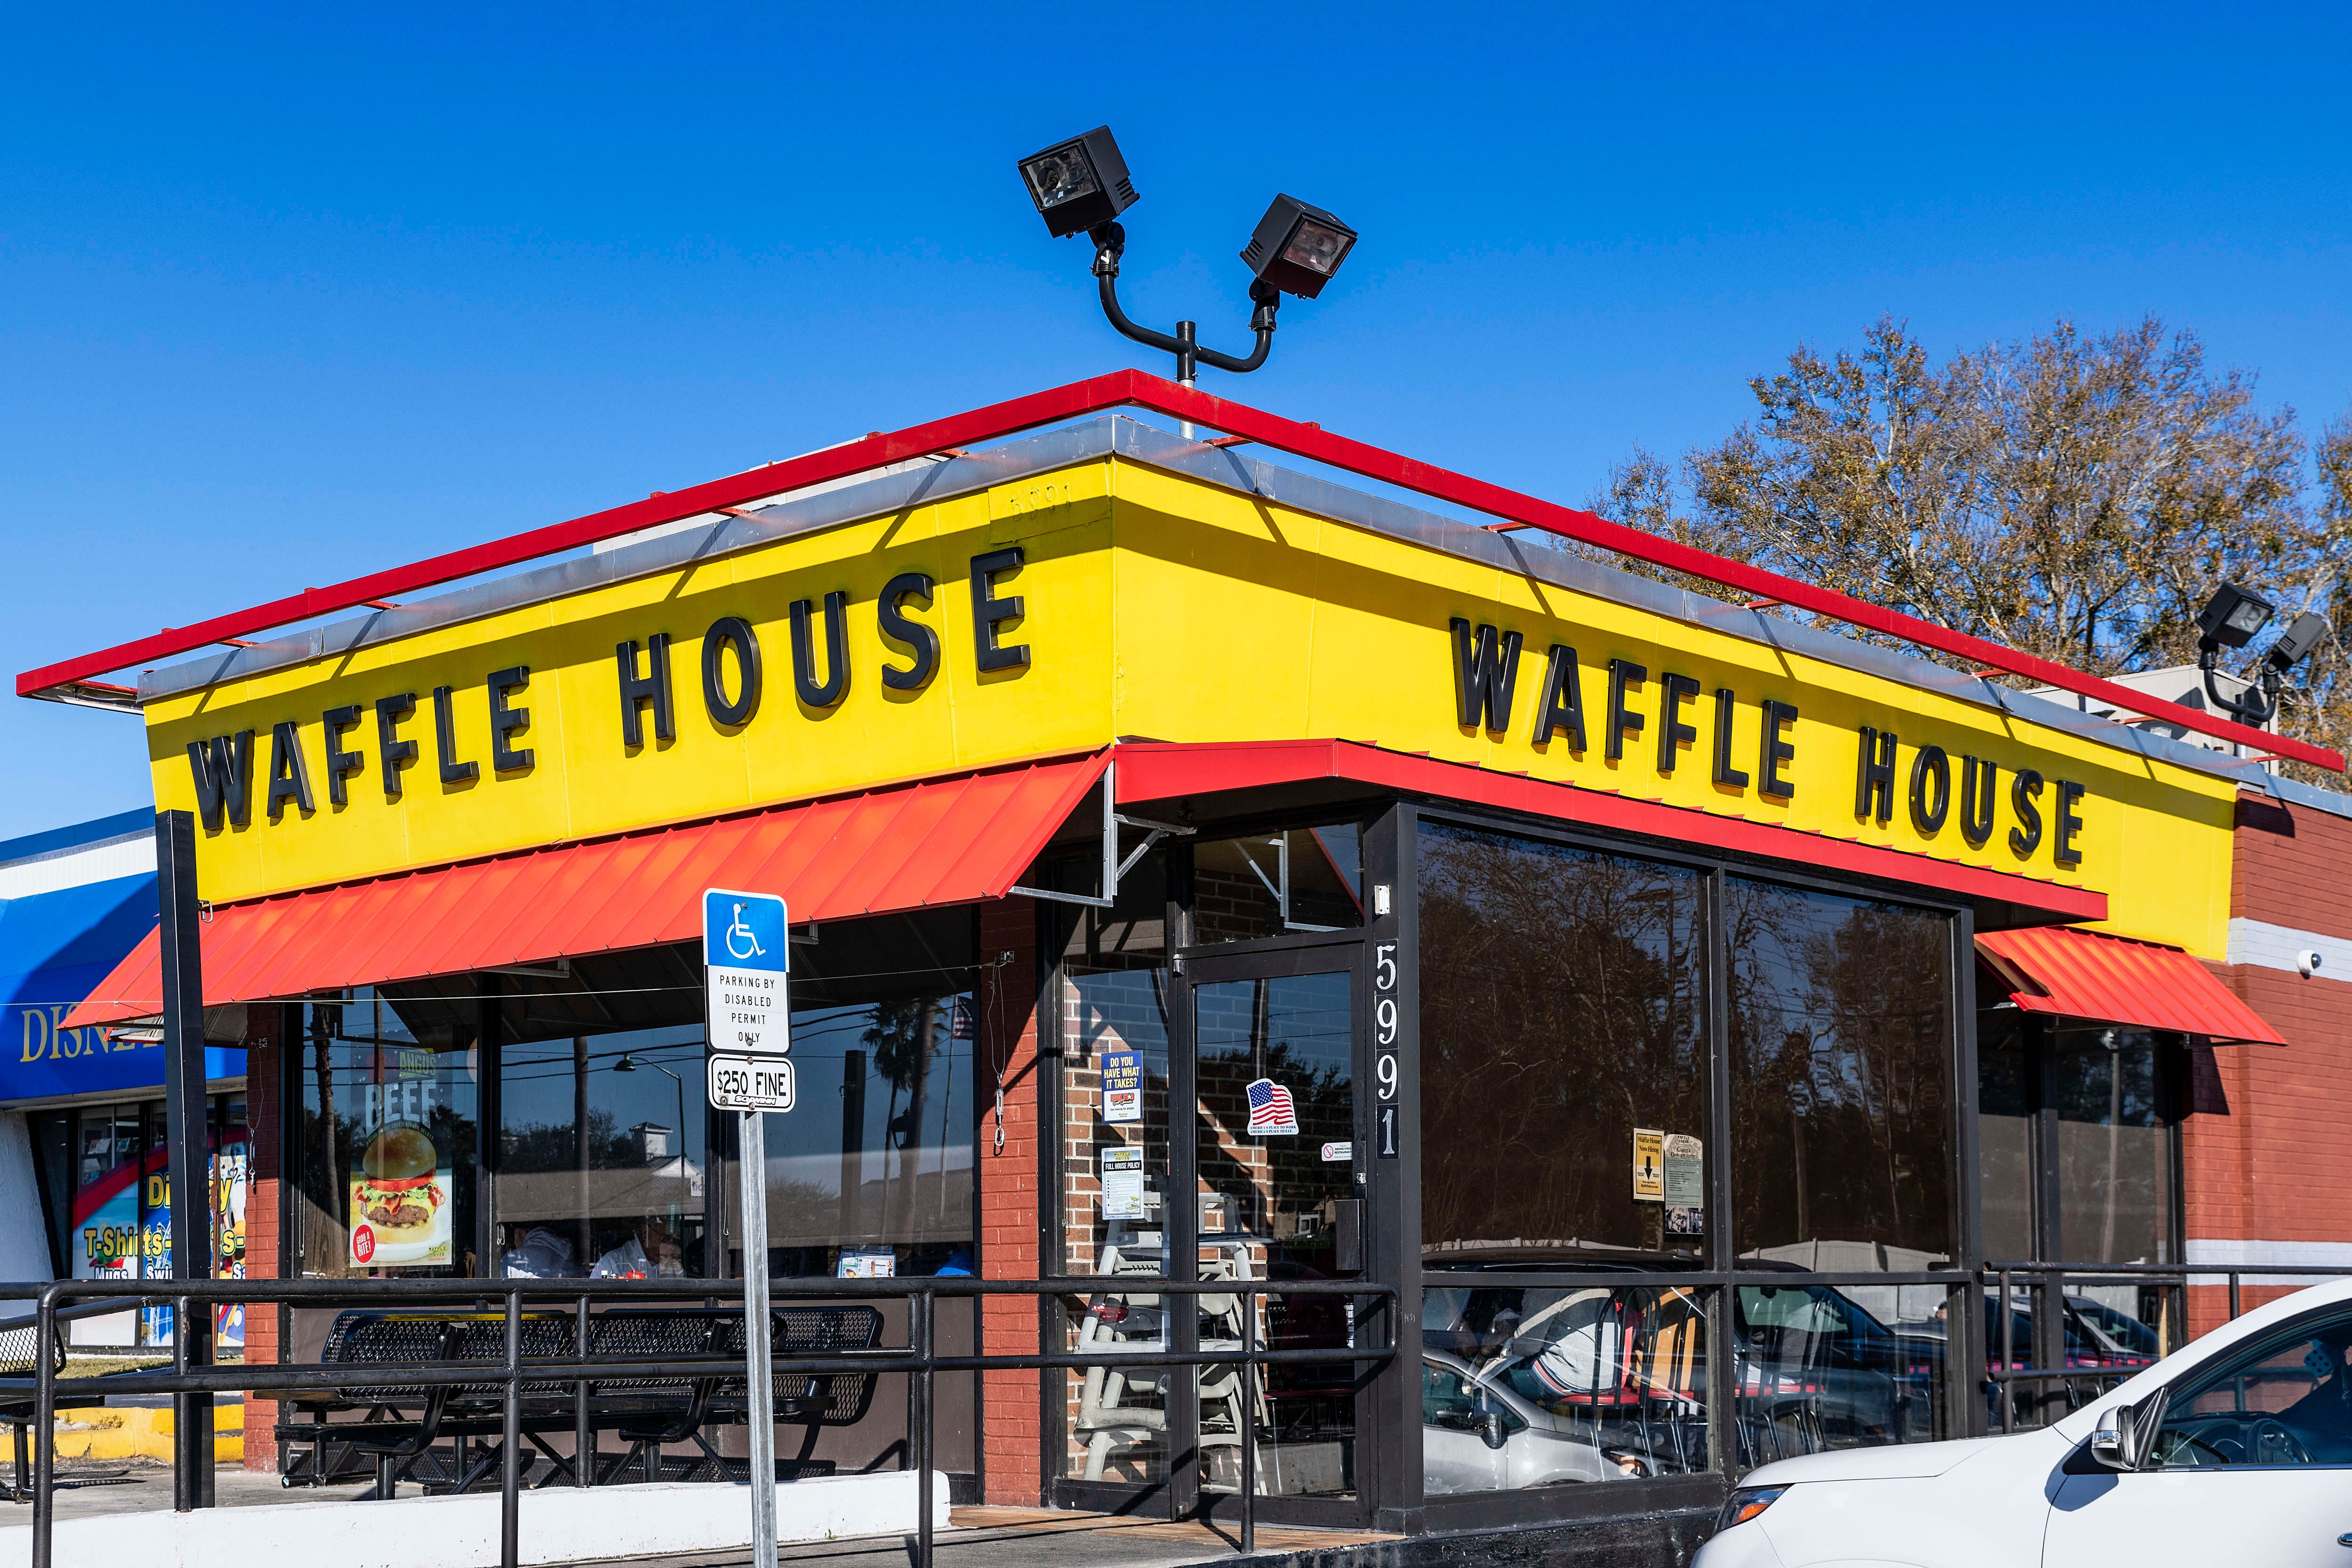 Black Woman Manhandled By Police In Alabama Waffle House Sues Restaurant